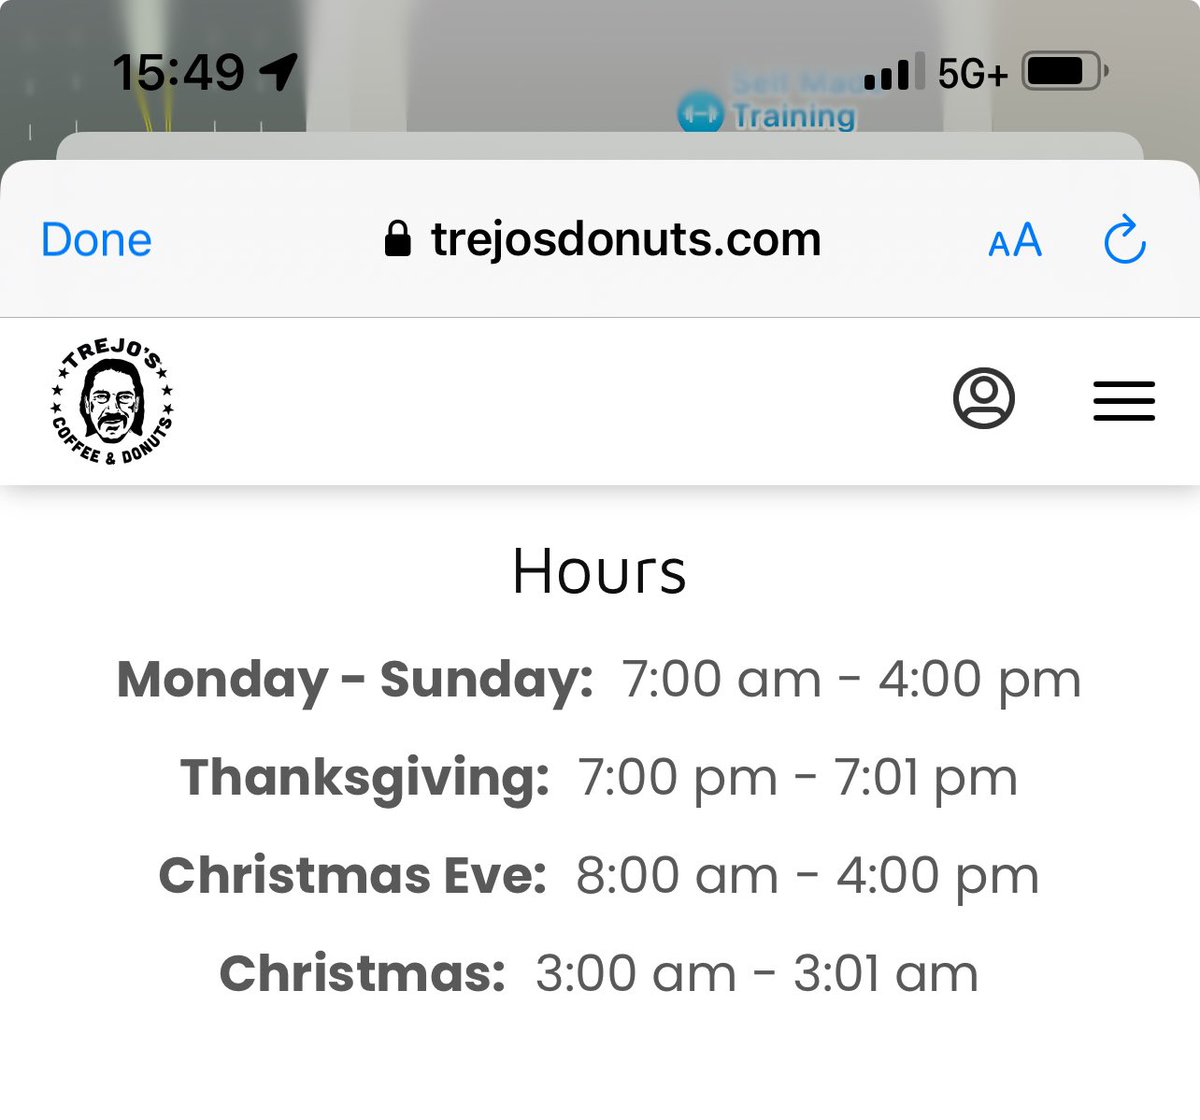 I understand closing five minutes earlythe day before a holiday, but closing over FIFTEEN minutes early? And being visibly pissed at the four people waiting outside when you have to open the door for a delivery? I love your food, but not a professional look, @TrejosTacos